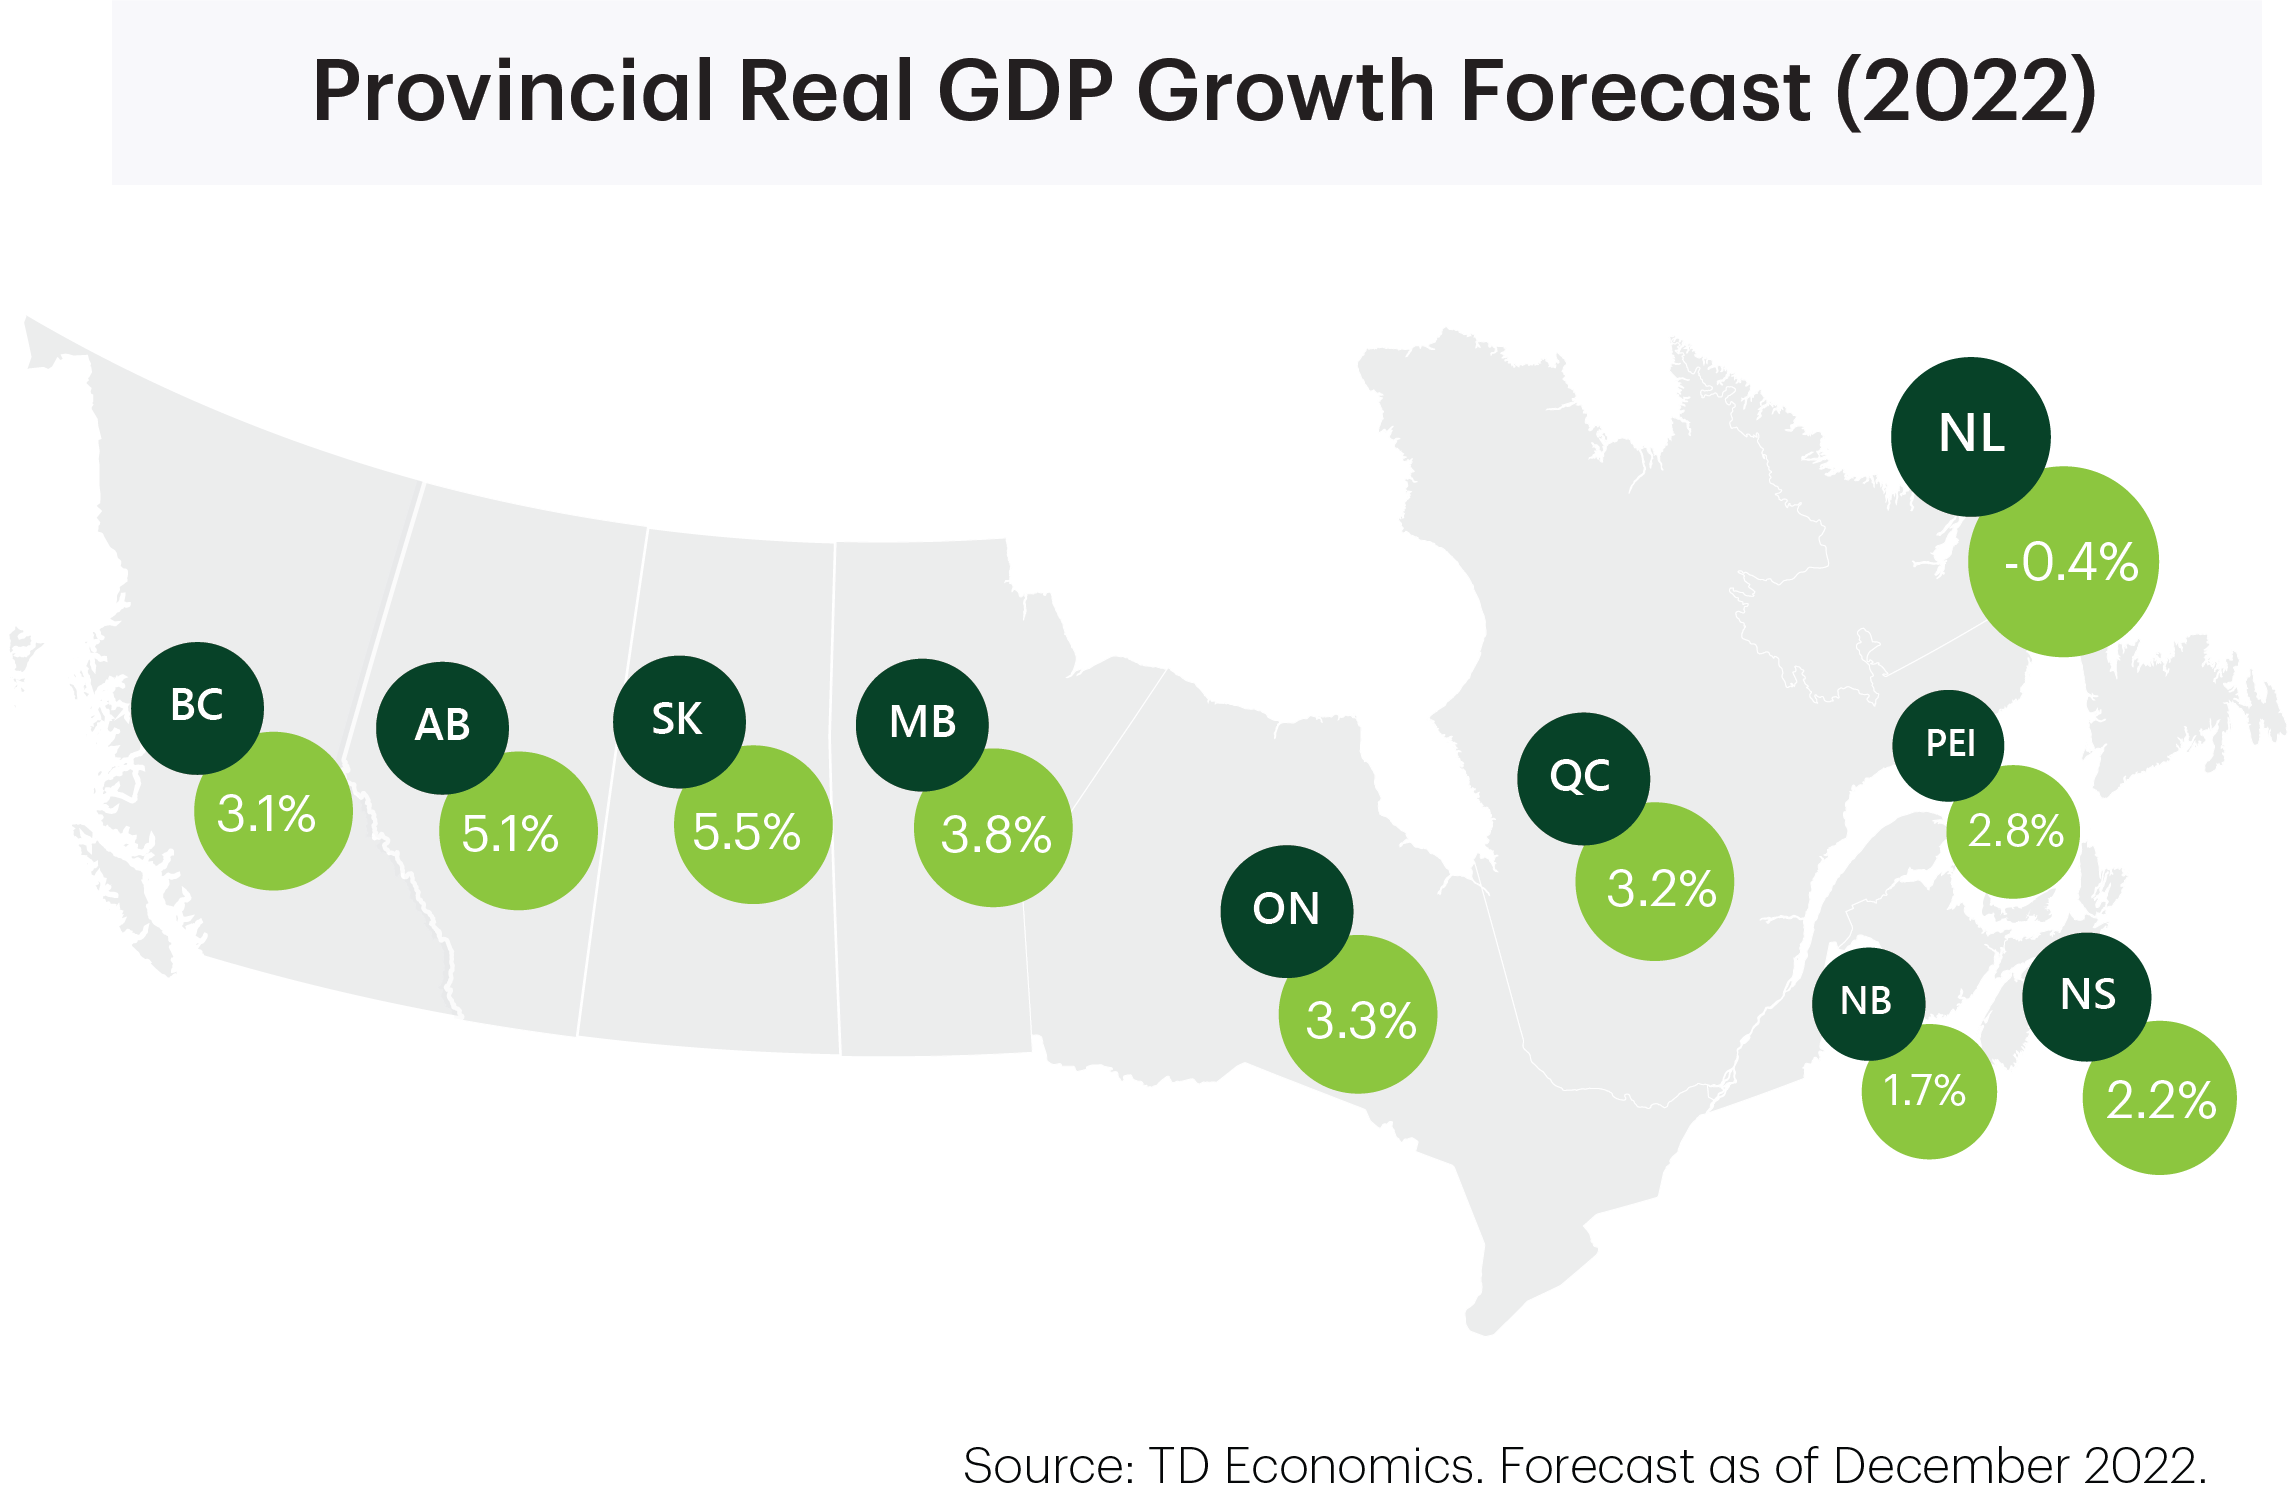 Provincial Real GDP Growth Forecast (2022)
    BC – 3.1%
    AB – 4.9%
    SK – 4.9%
    MB – 3.6%
    ON – 2.9%
    QC – 3.4%
    NB – 1.4%
    NS – 2.2%
    PE – 2.8%
    NL – -0.4%